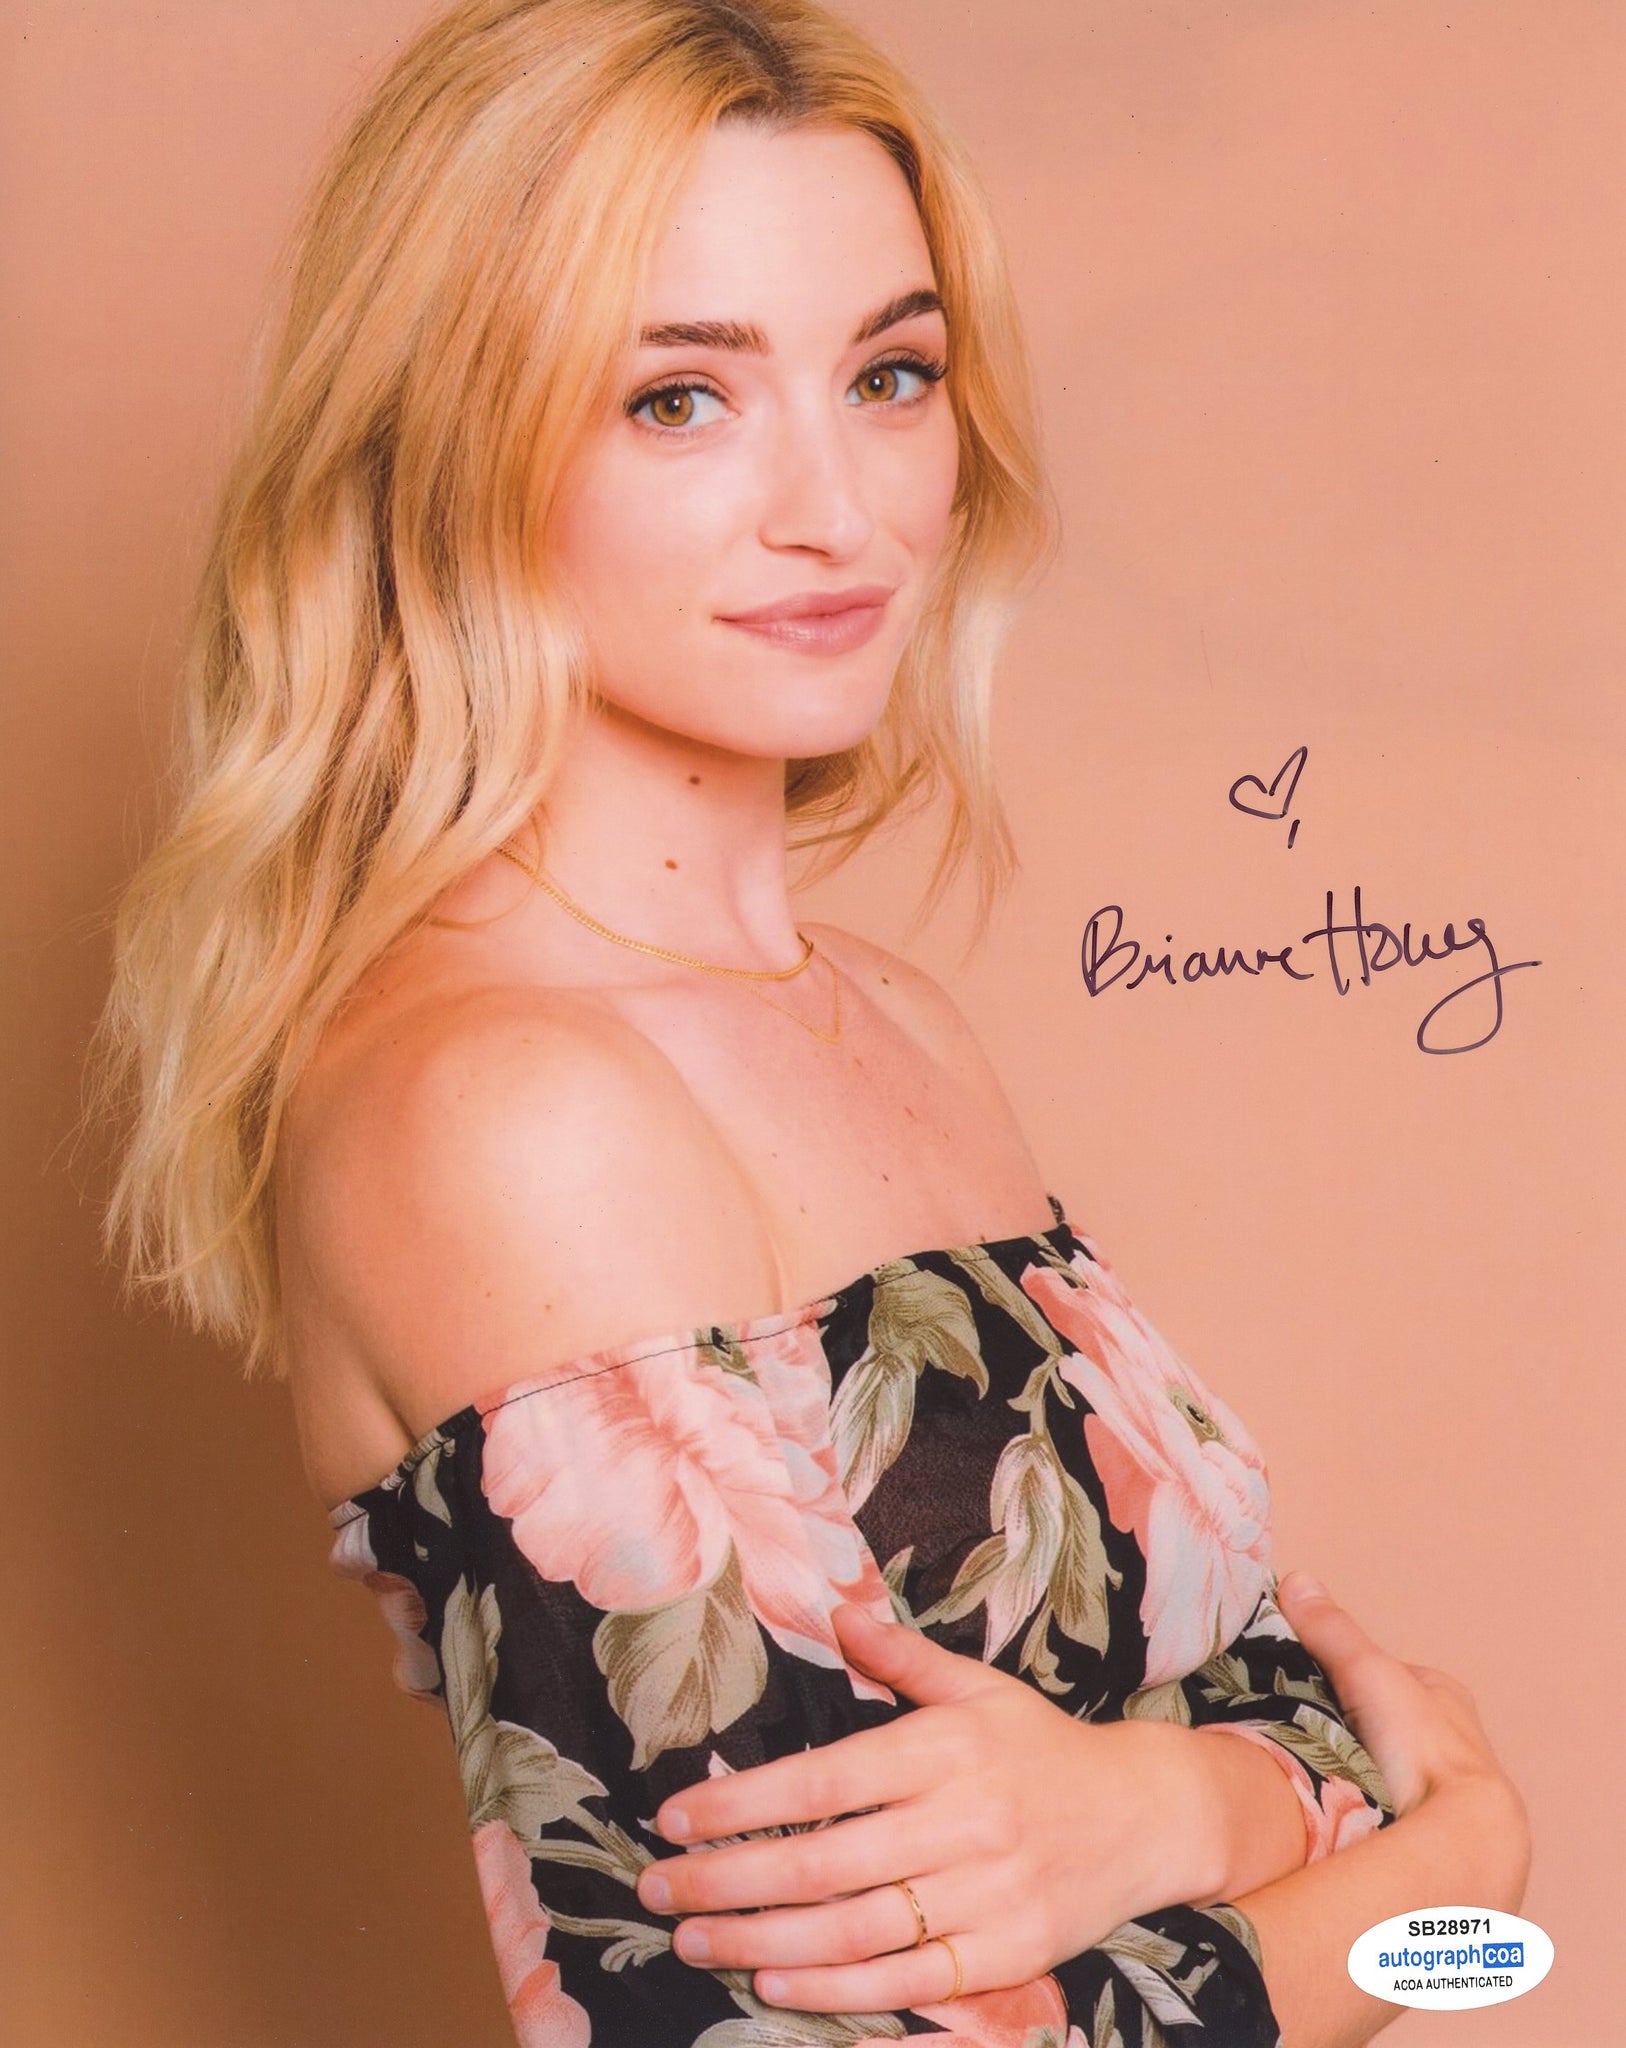 Brianne howey ginny and georgia signed autograph x photo acoa outlaw hobbies authentic autographs